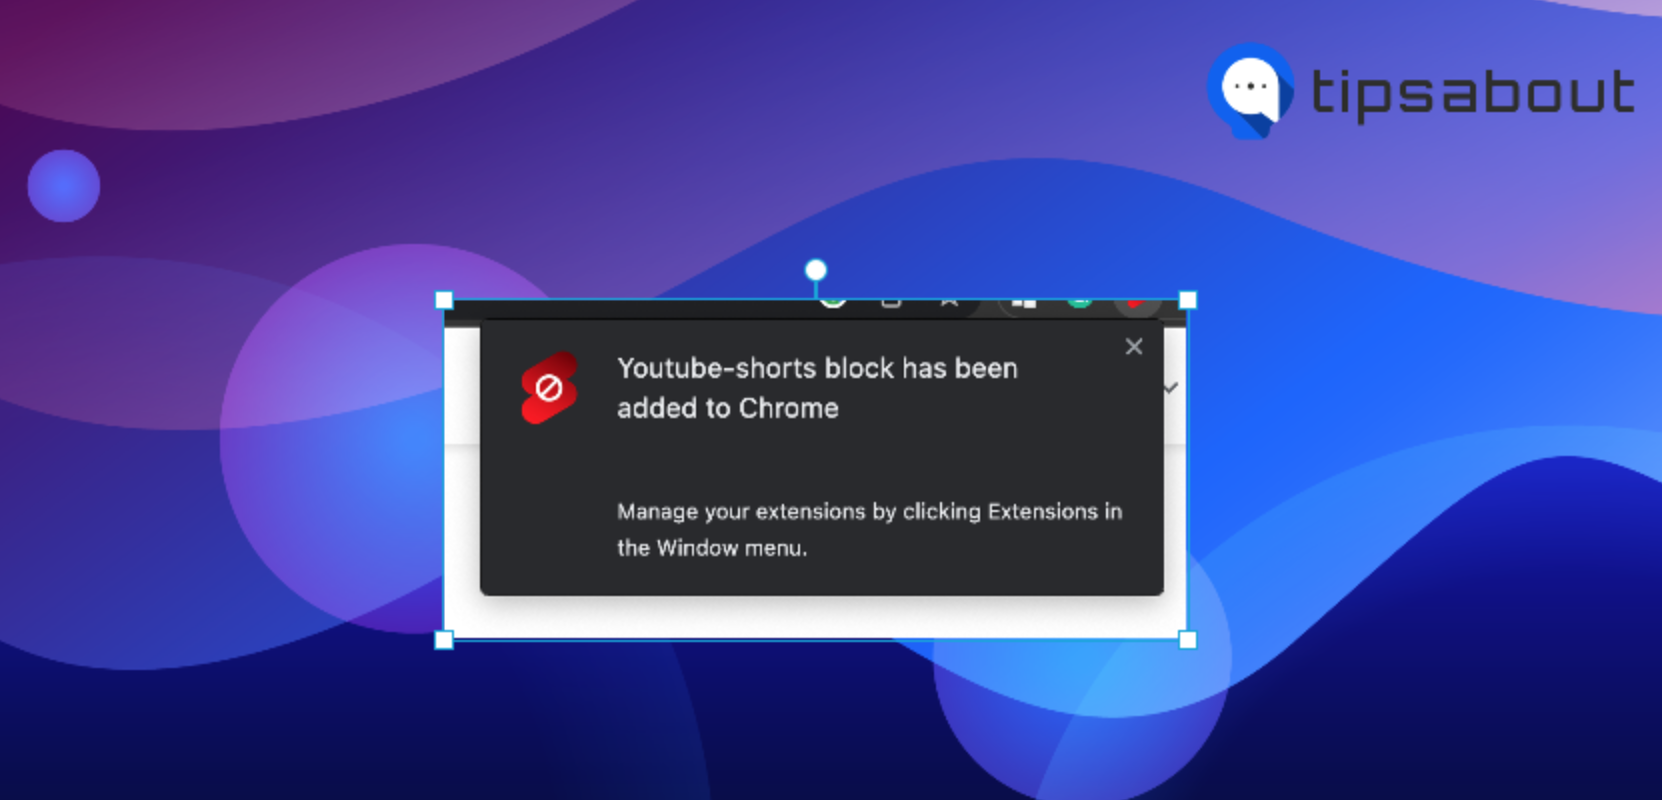 YouTube Shorts block has been added to Chrome